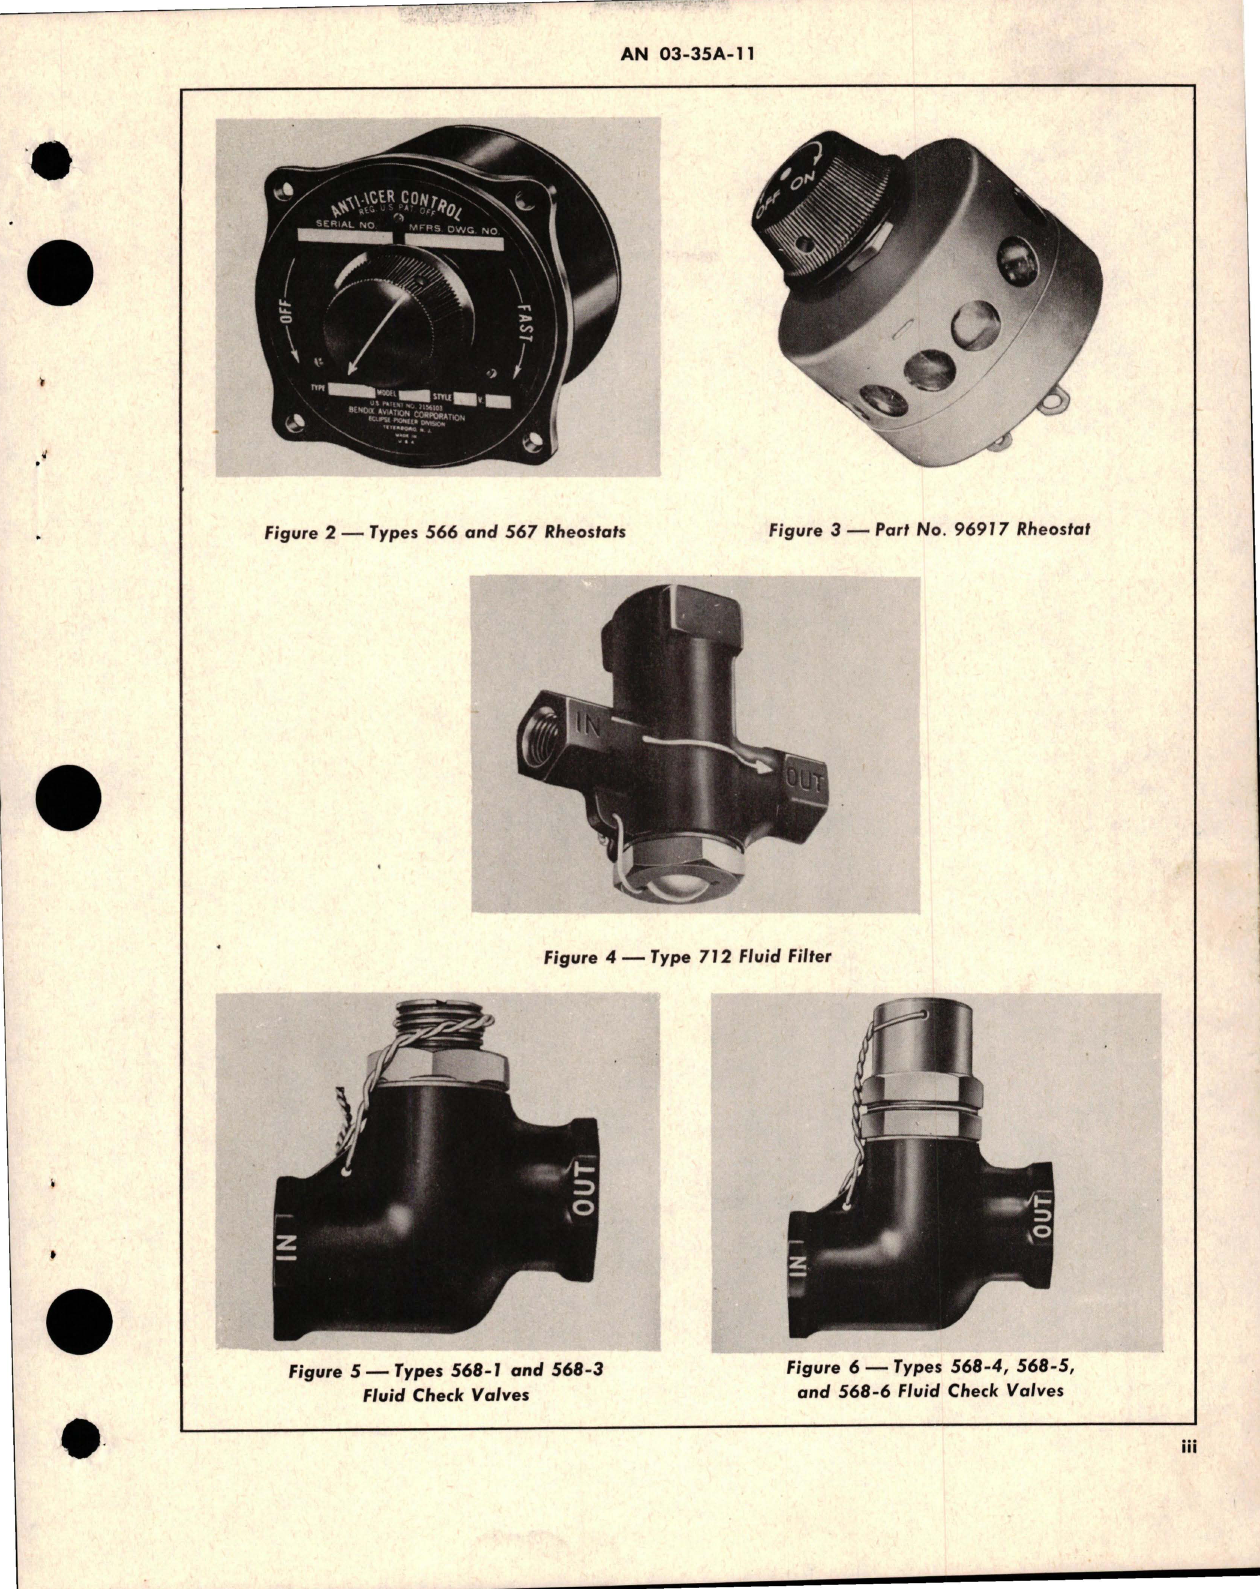 Sample page 5 from AirCorps Library document: Operation, Service and Overhaul Instructions with Parts Catalog for Propeller and Windshield Anti-Icer Pumps - Type 744